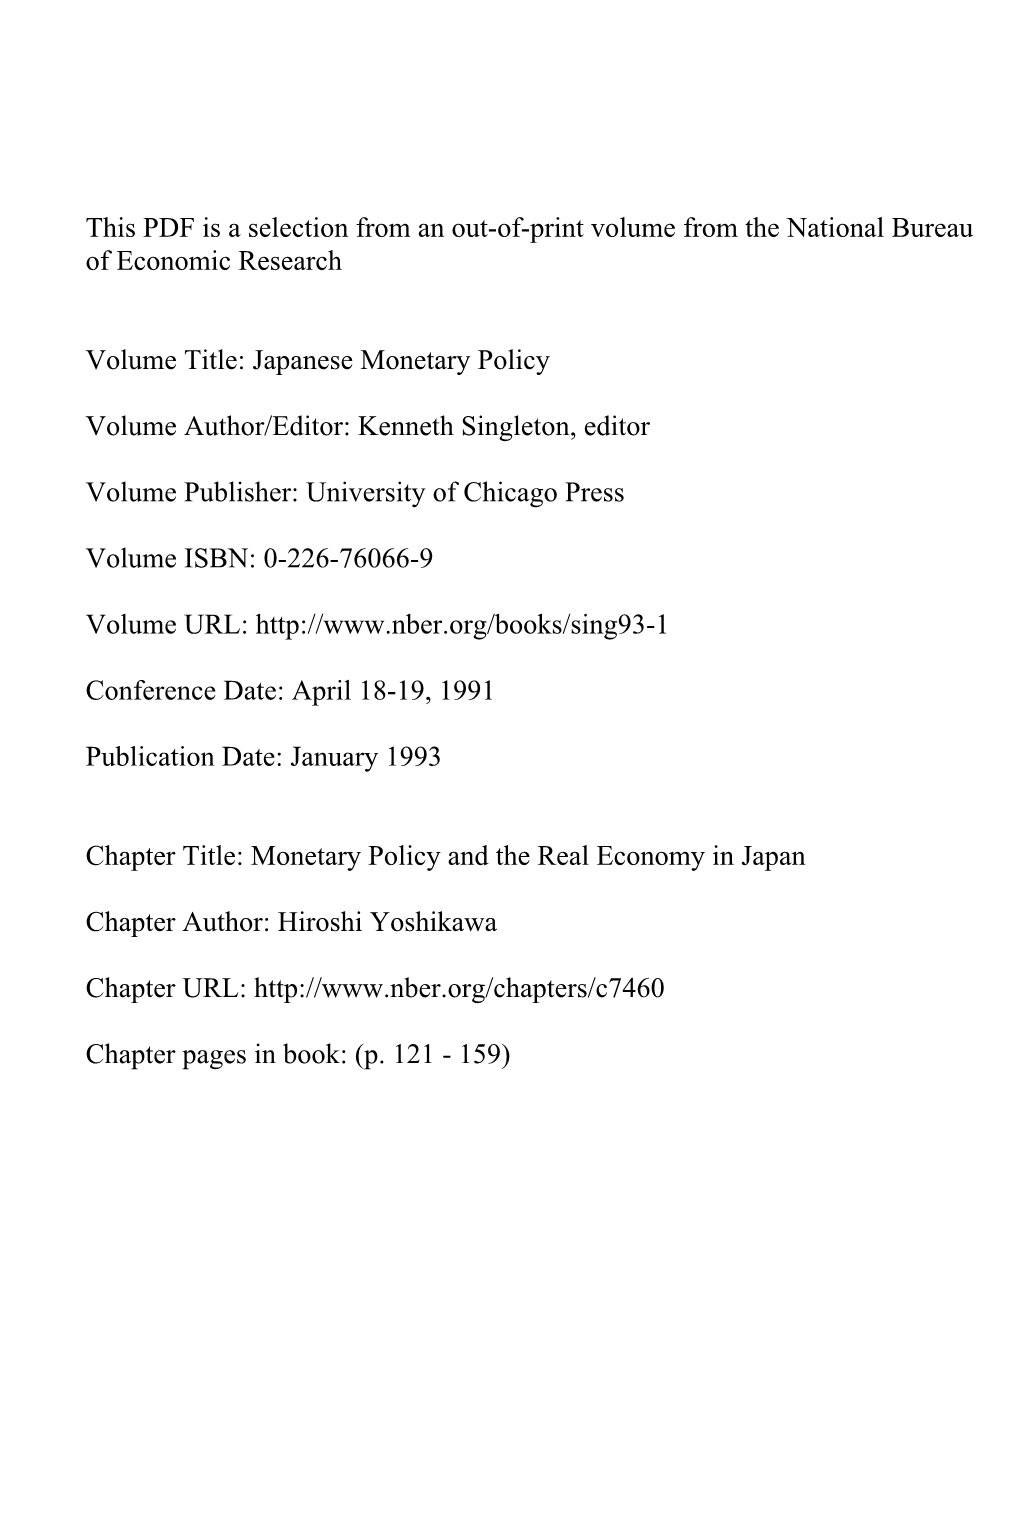 Monetary Policy and the Real Economy in Japan